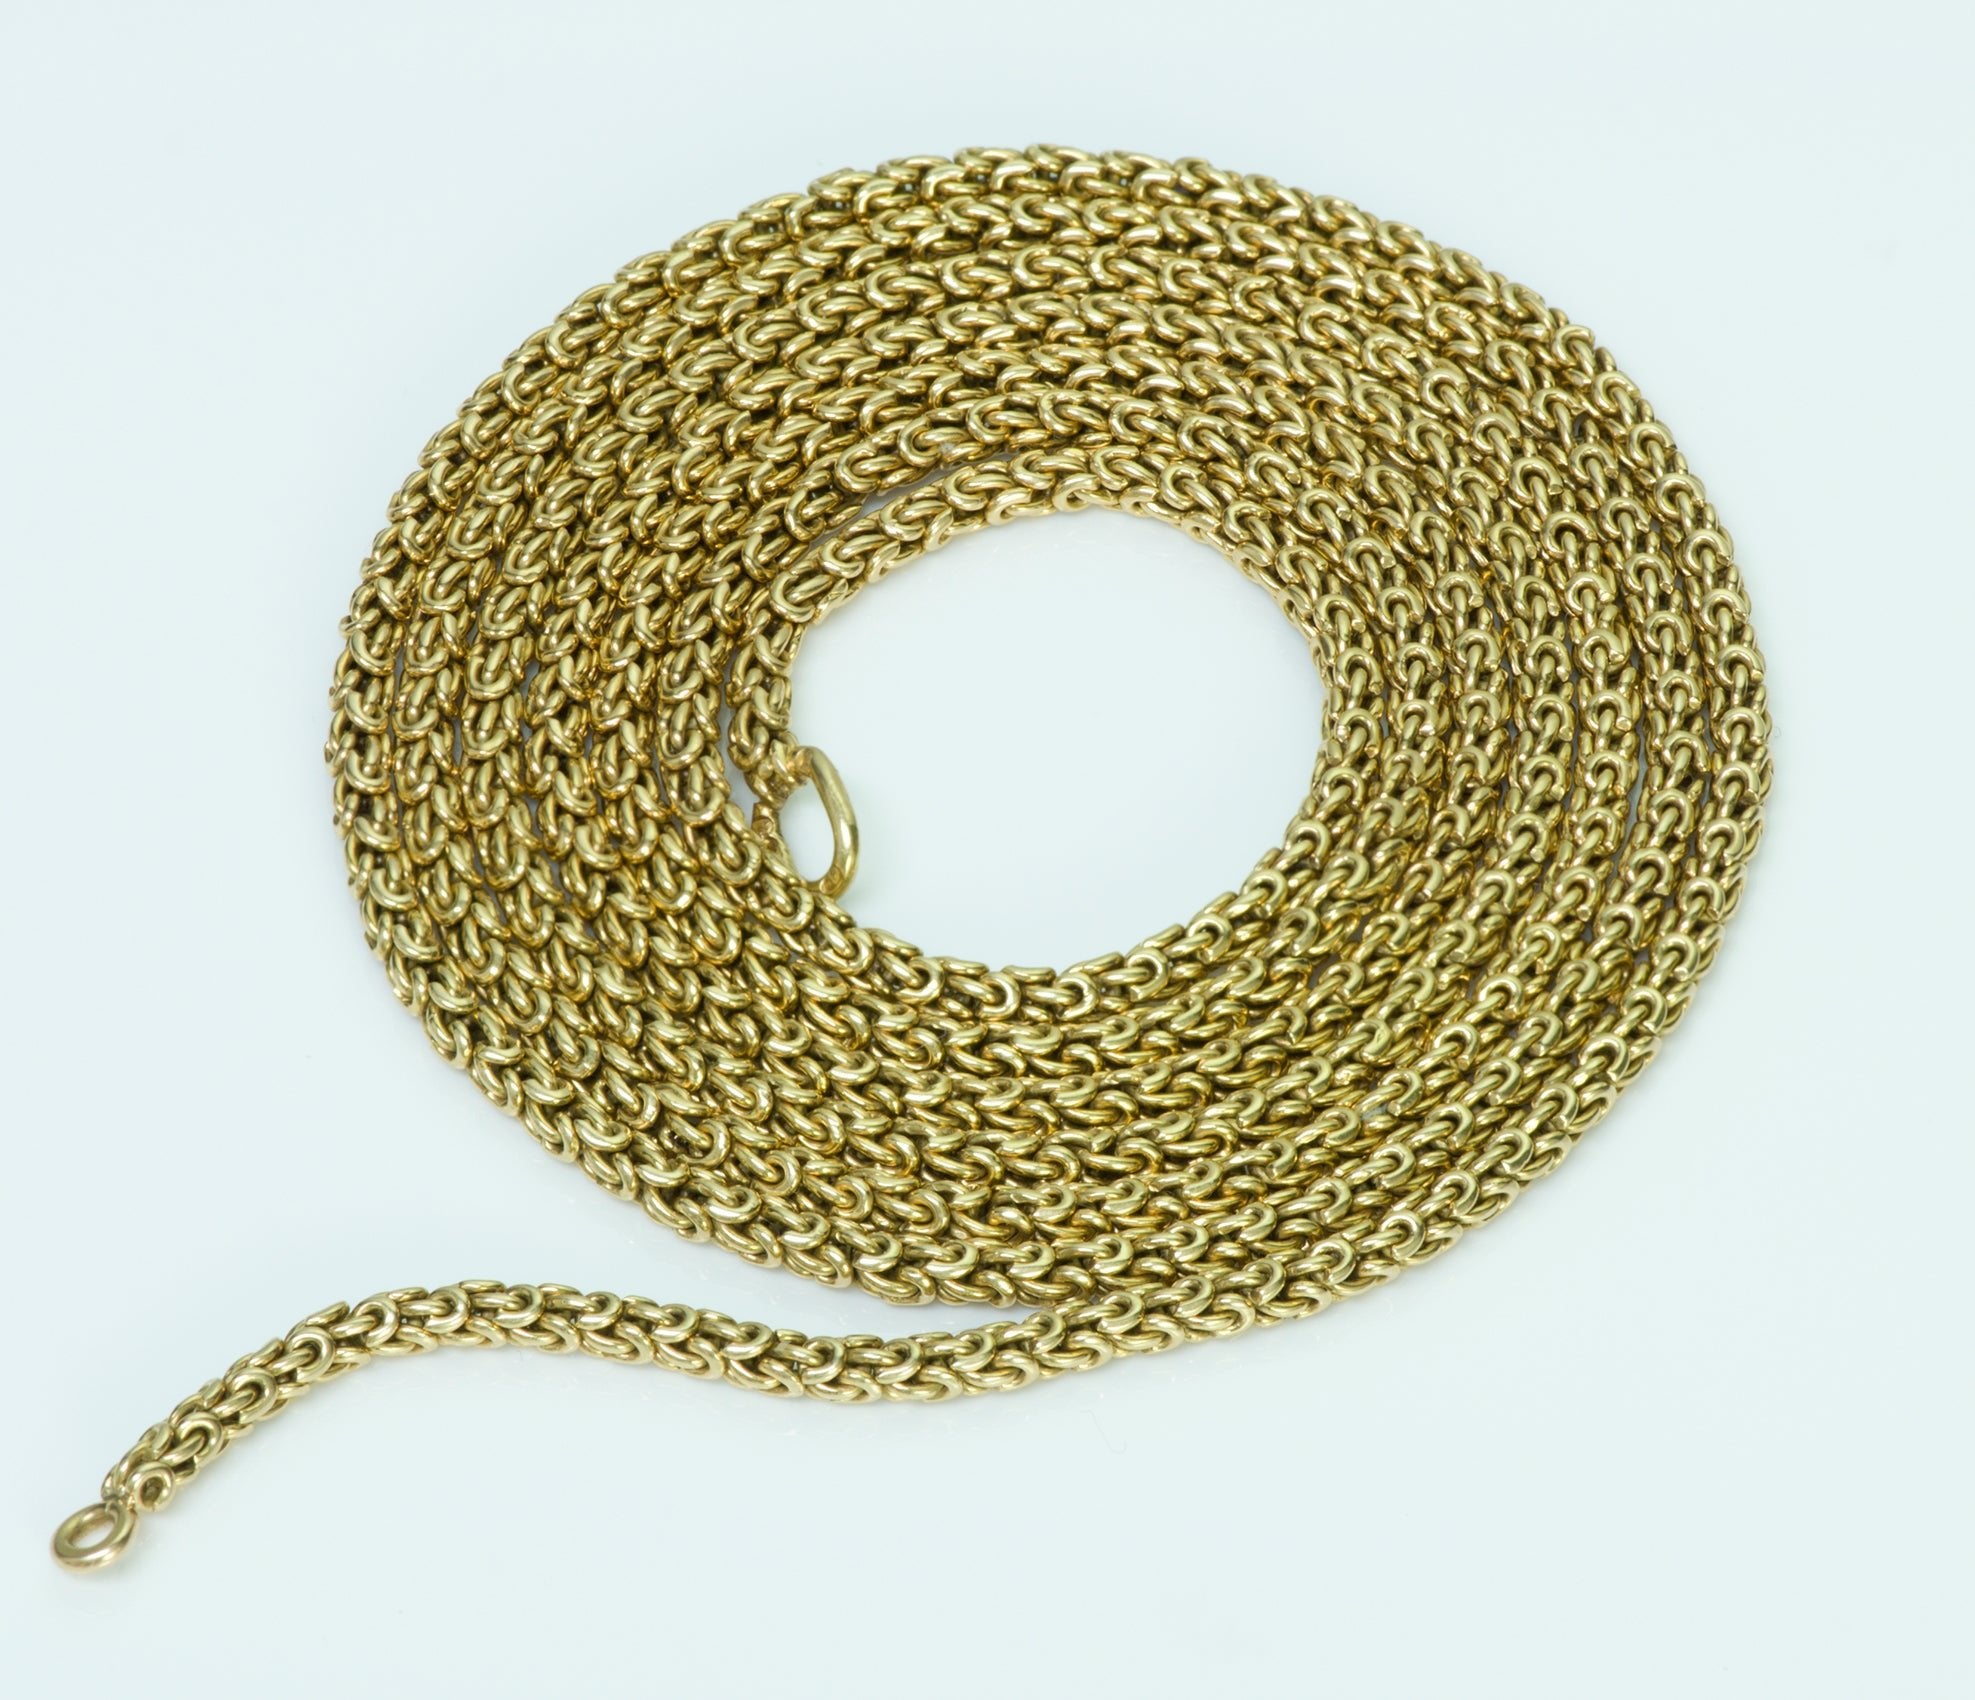 Van Cleef and Arpels Gold Chain Necklace